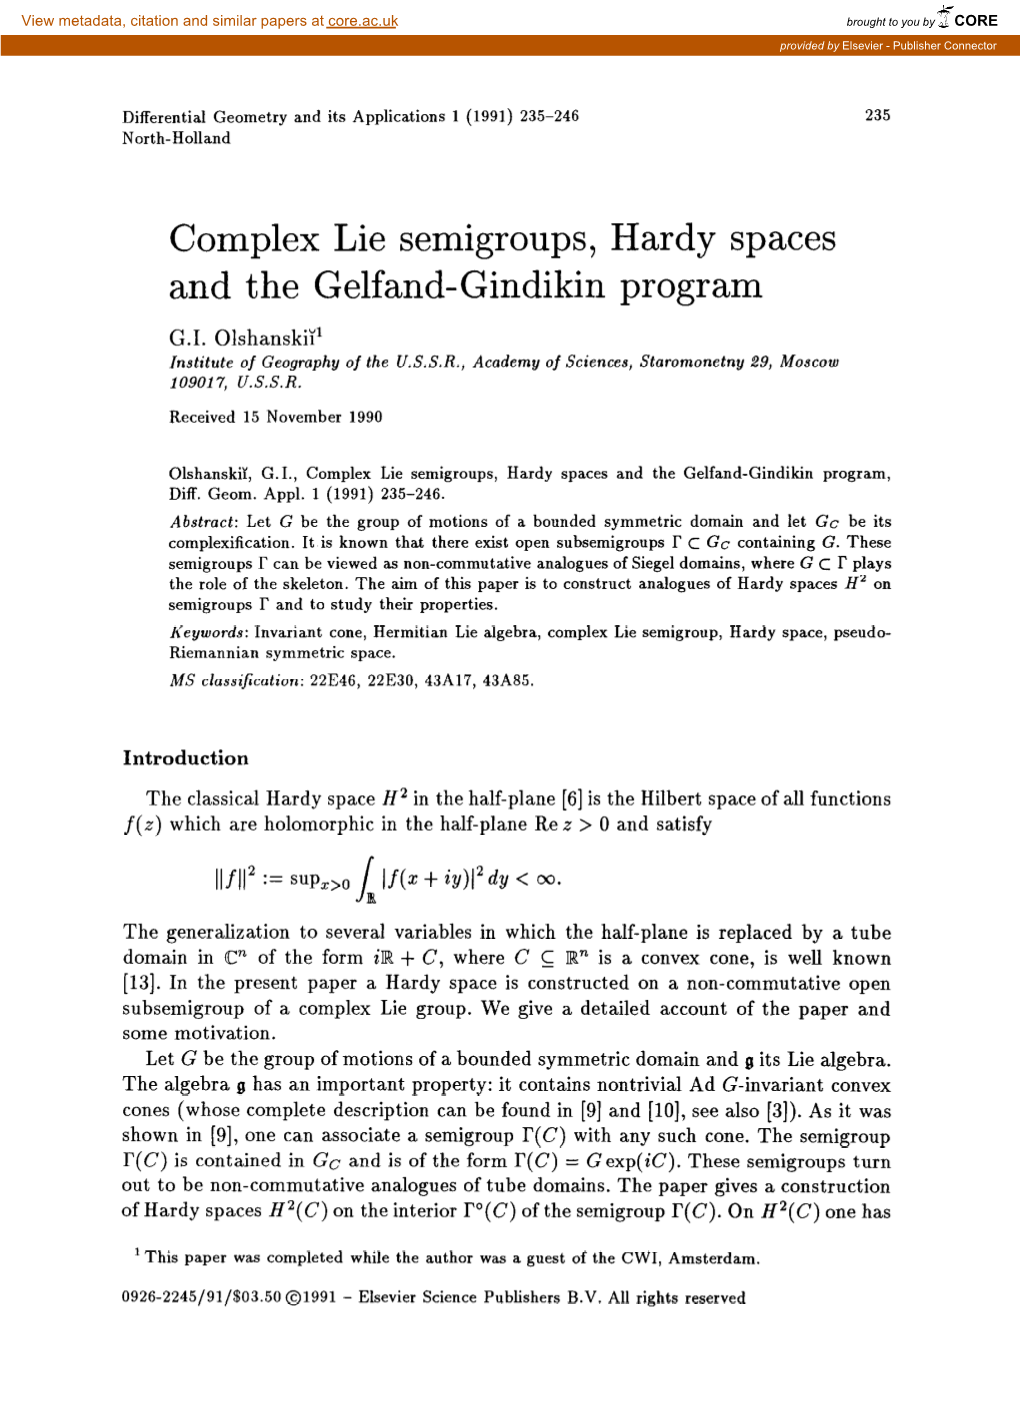 Complex Lie Semigroups, Hardy Spaces and the Gelfand-Gindikin Program